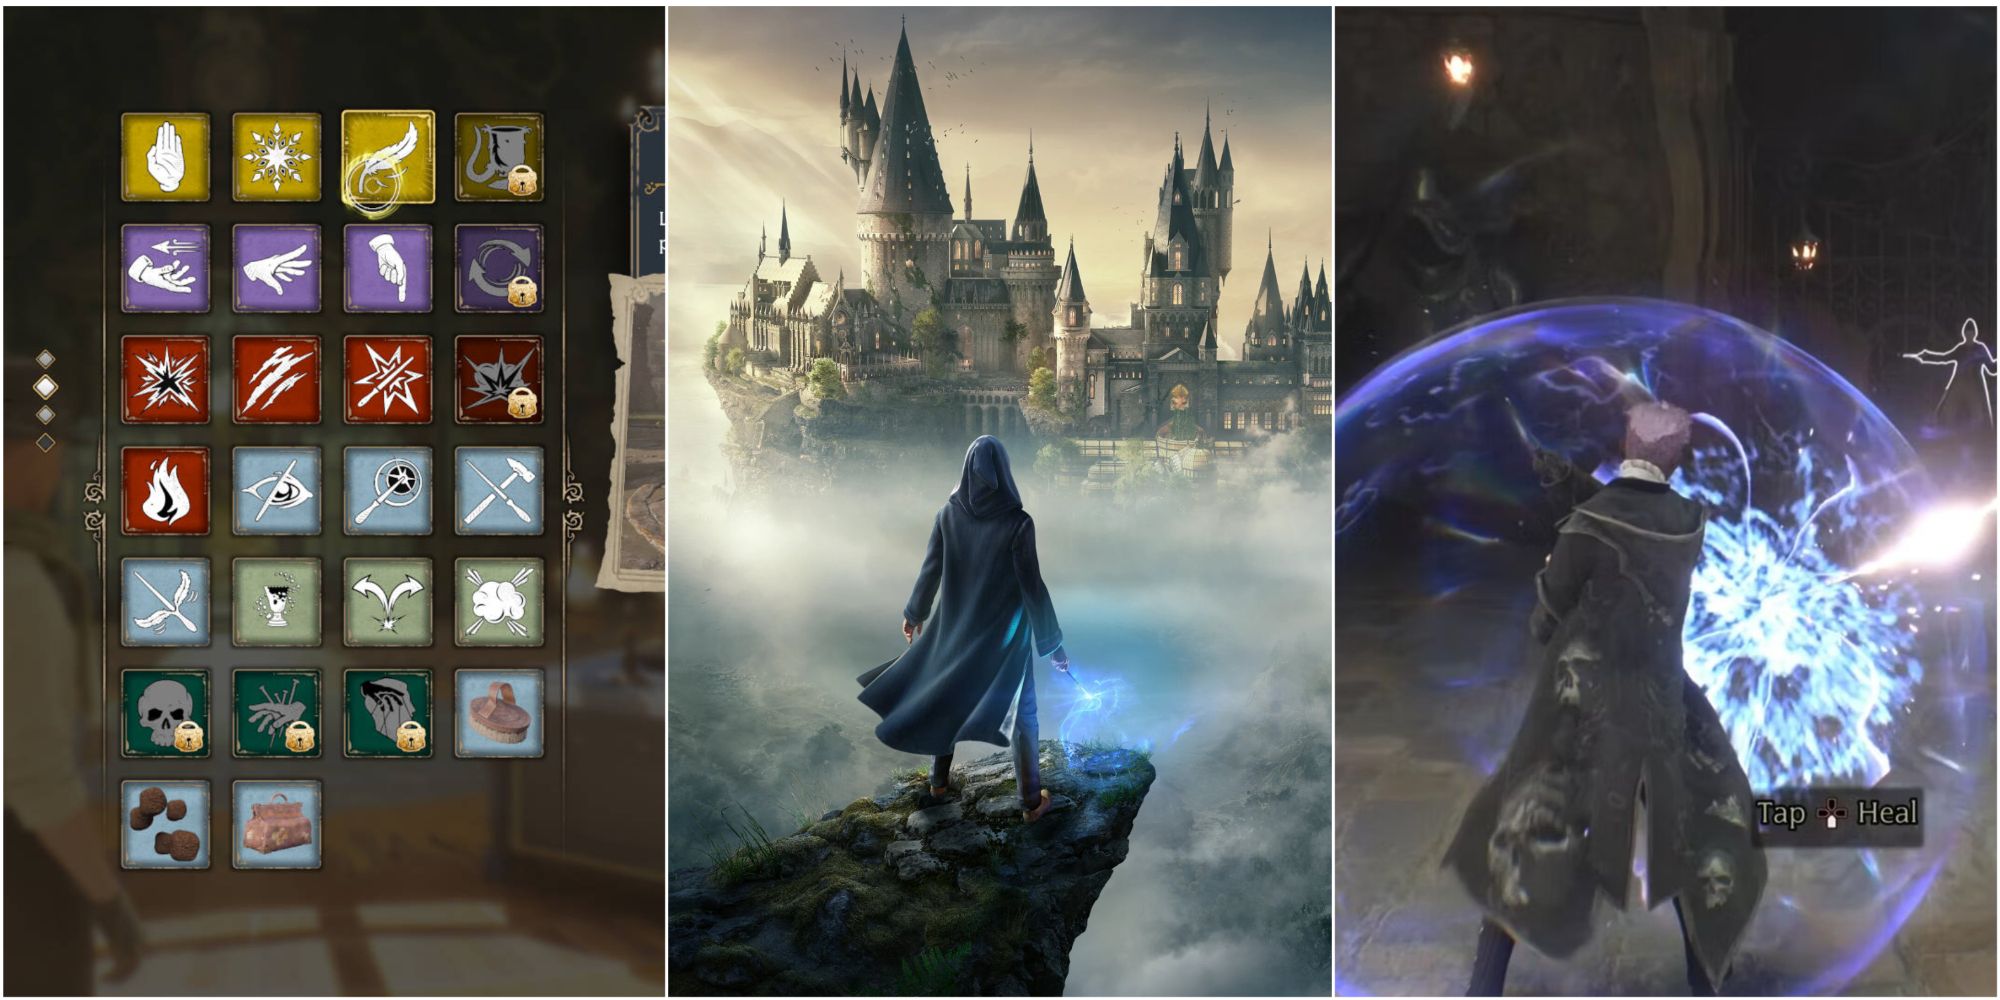 Hogwarts Legacy: All spells, abilities, potions, attacks, & more - Dexerto